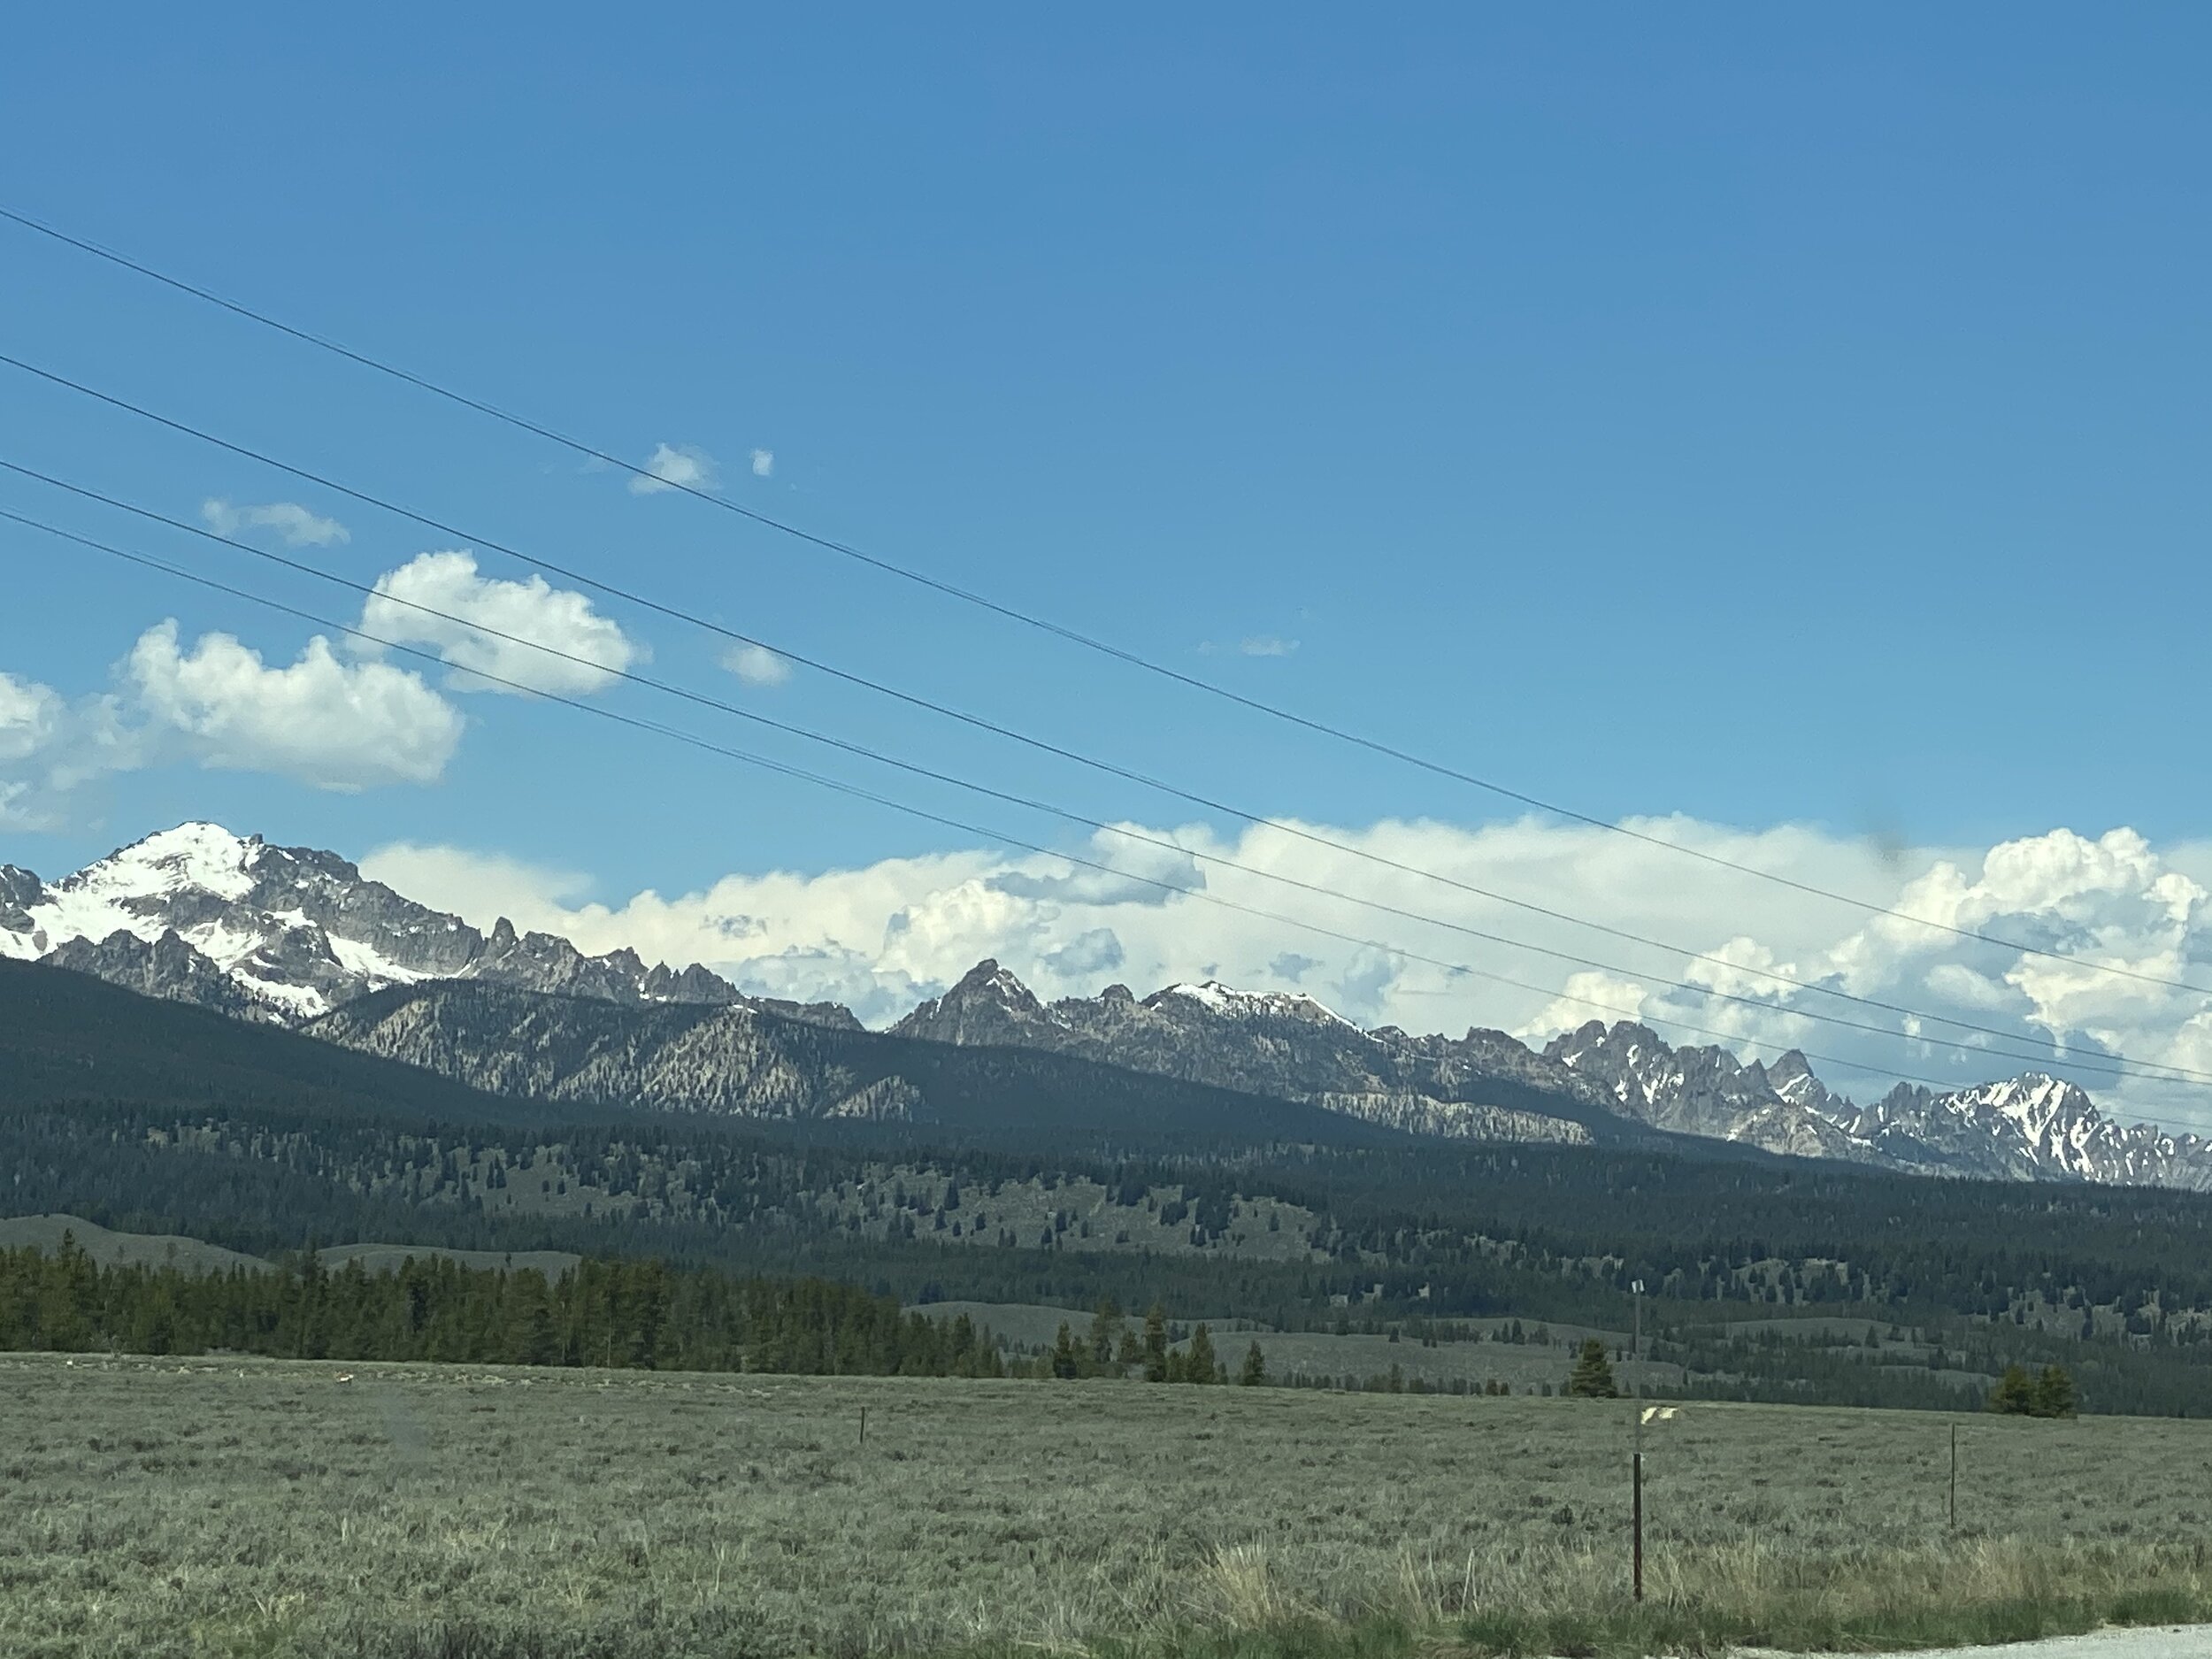 Sawtooth Mountains, named for their jagged peaks.  Photo by Karen Boudreaux, June 3, 2021